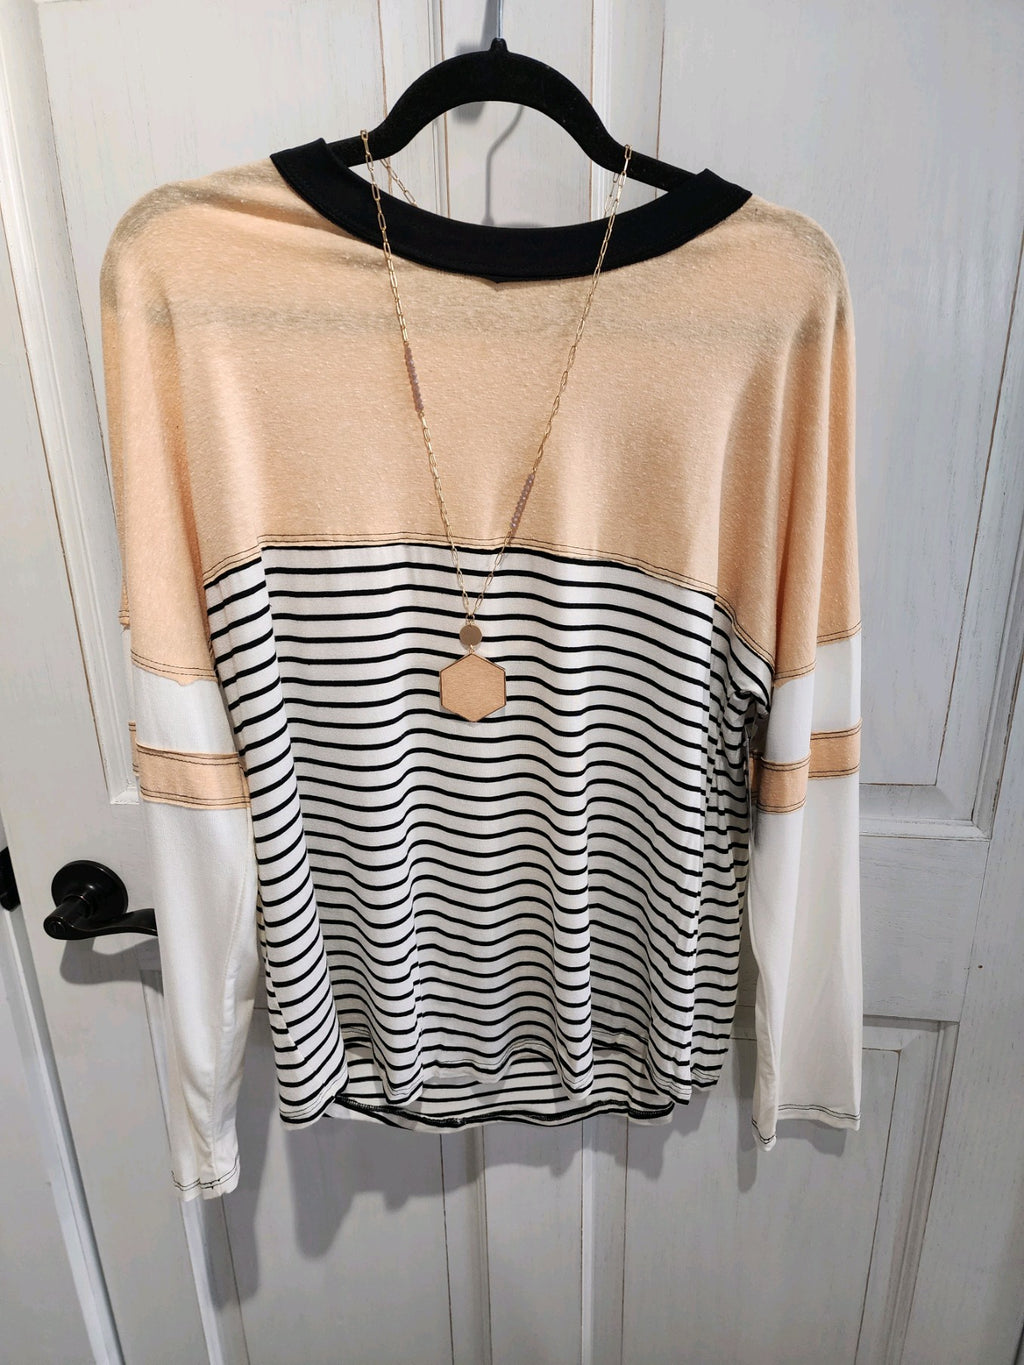 : Peach Striped Color Block Knit Top - Catching Fireflies Boutique